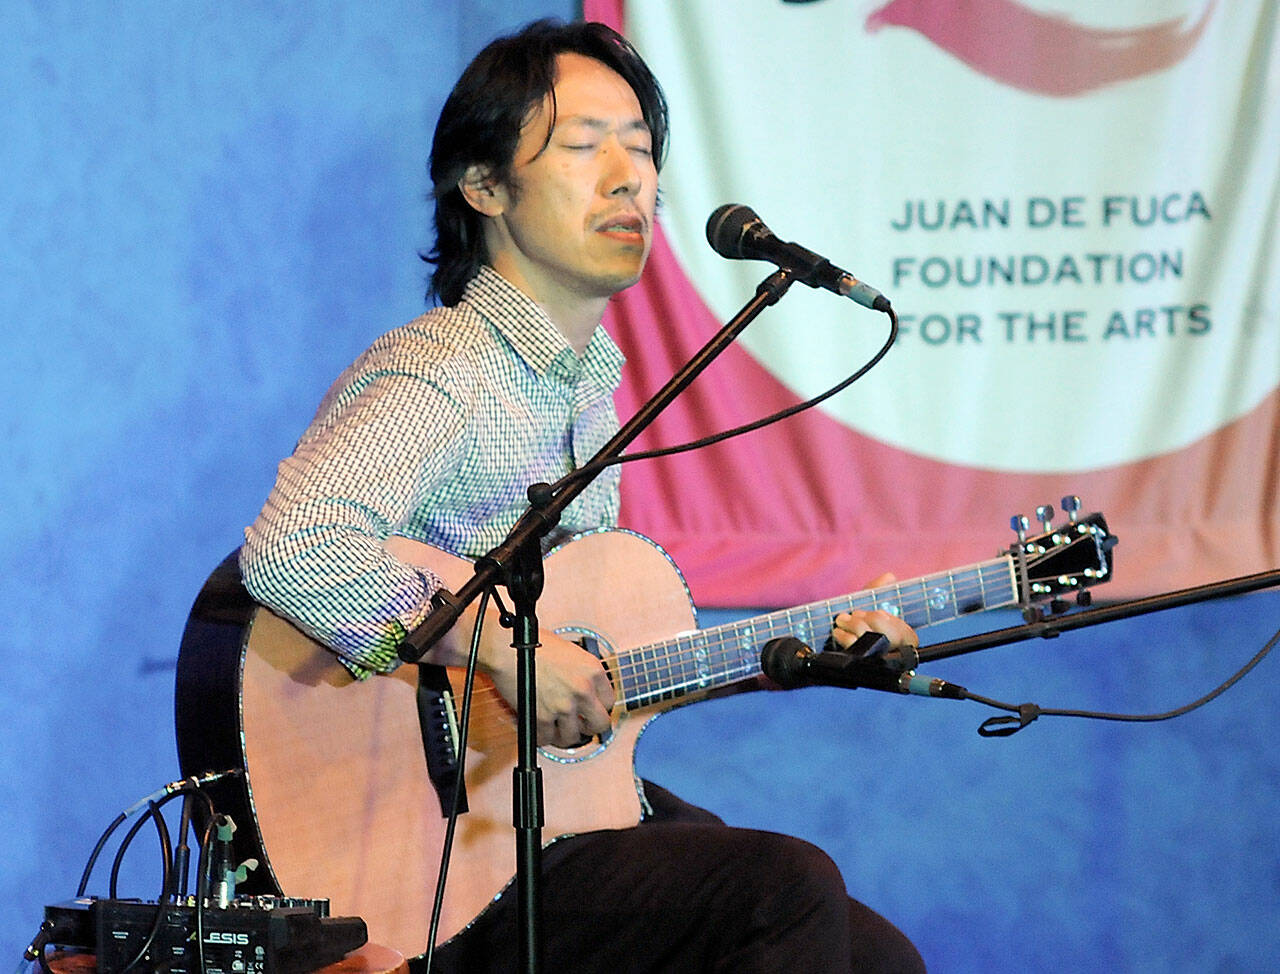 Hiroya Tsukamoto, originally from Kyoto, Kyoto Prefecture, Japan, but now living in the United States, performs on classical guitar on Saturday in Port Angeles. (Keith Thorpe/Peninsula Daily News)